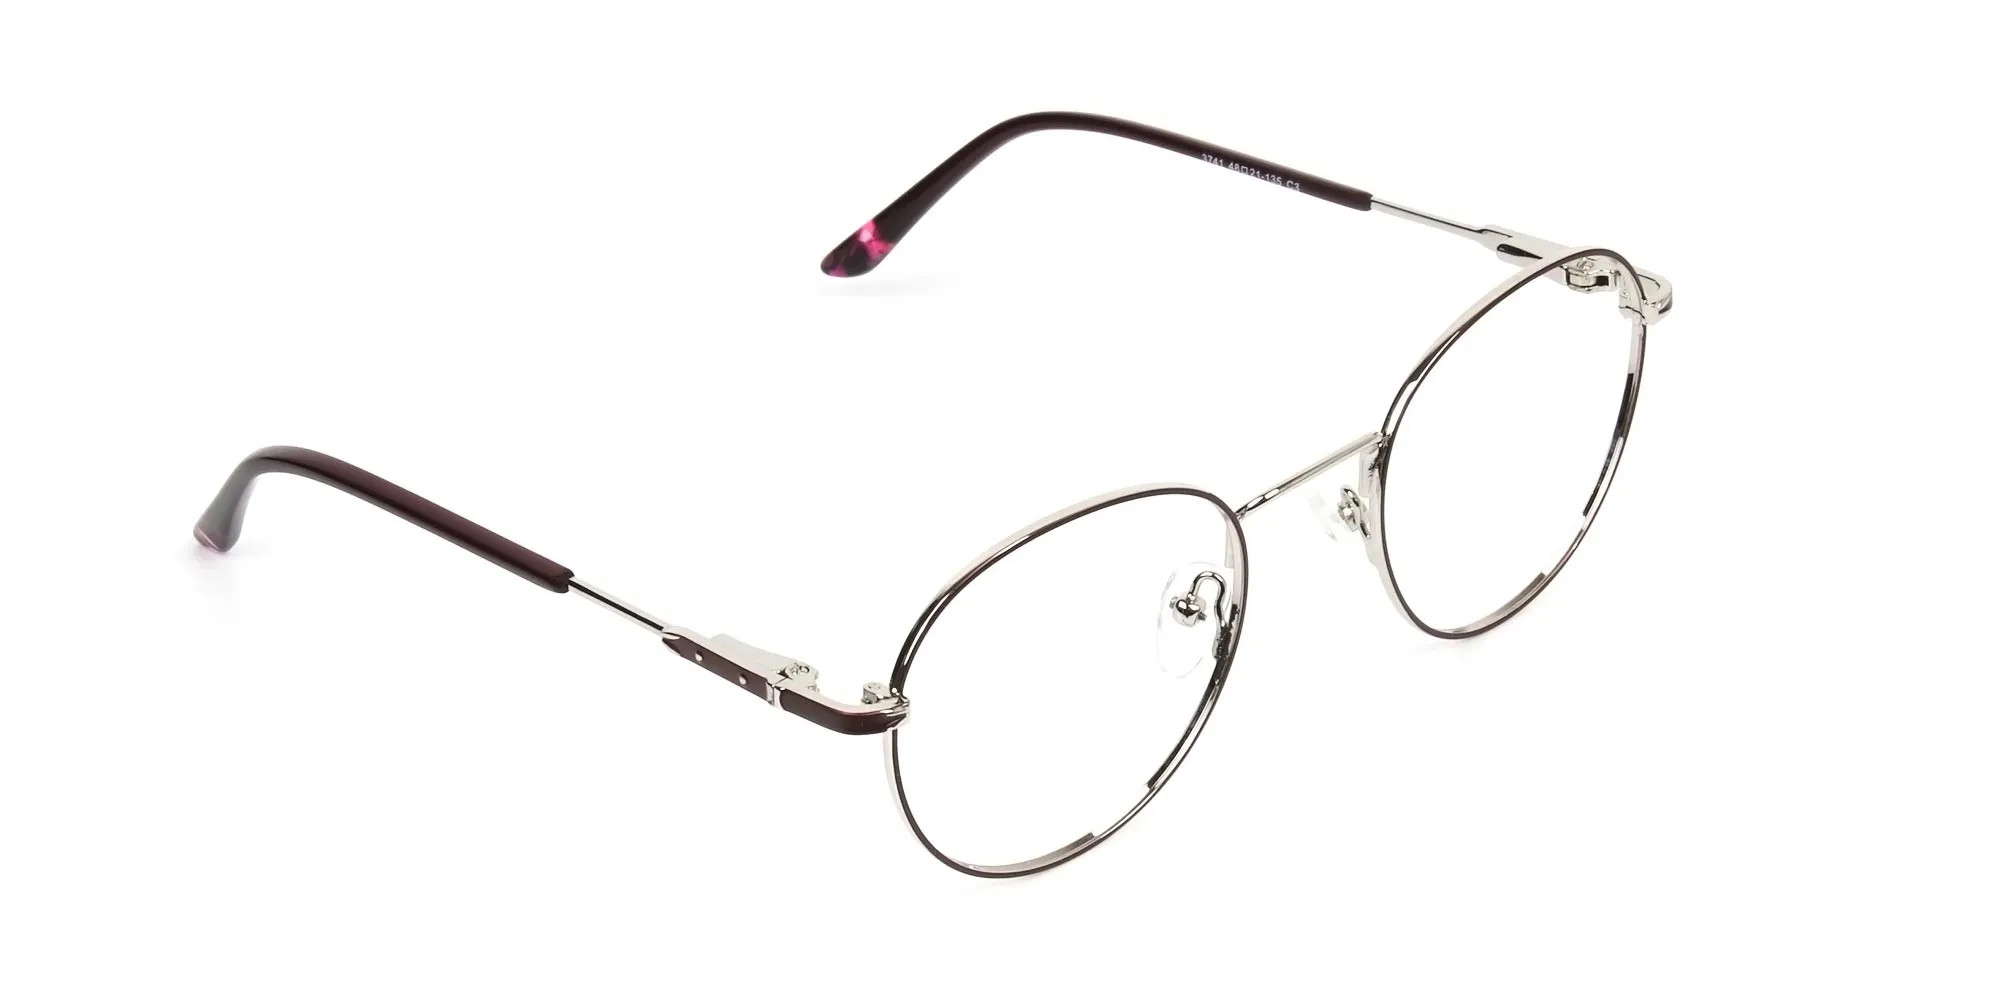 Silver, Burgundy & Purple Round Spectacles - 2